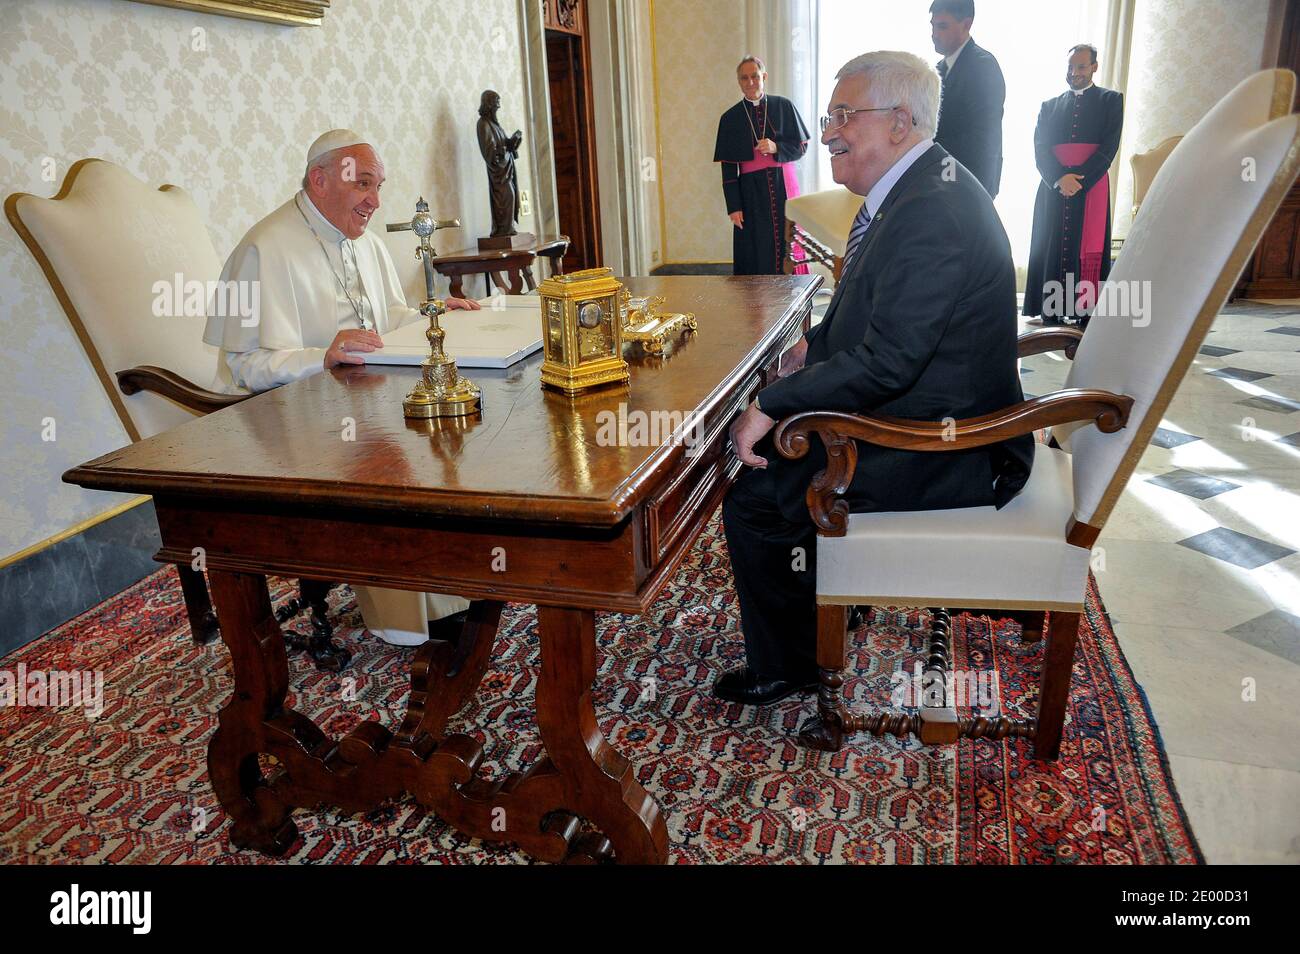 Pope Francis met Palestinian President Mahmud Abbas also known as Abu Mazen during a private audience at the Vatican on October 17, 2013. During the cordial discussions, reference was made to the situation in the Middle East and in particular to the reinstatement of negotiations between Israelis and Palestinians. Mahmud Abbas invited Pope Francis to visit the Holy Land. Photo by ABACAPRESS.COM Stock Photo